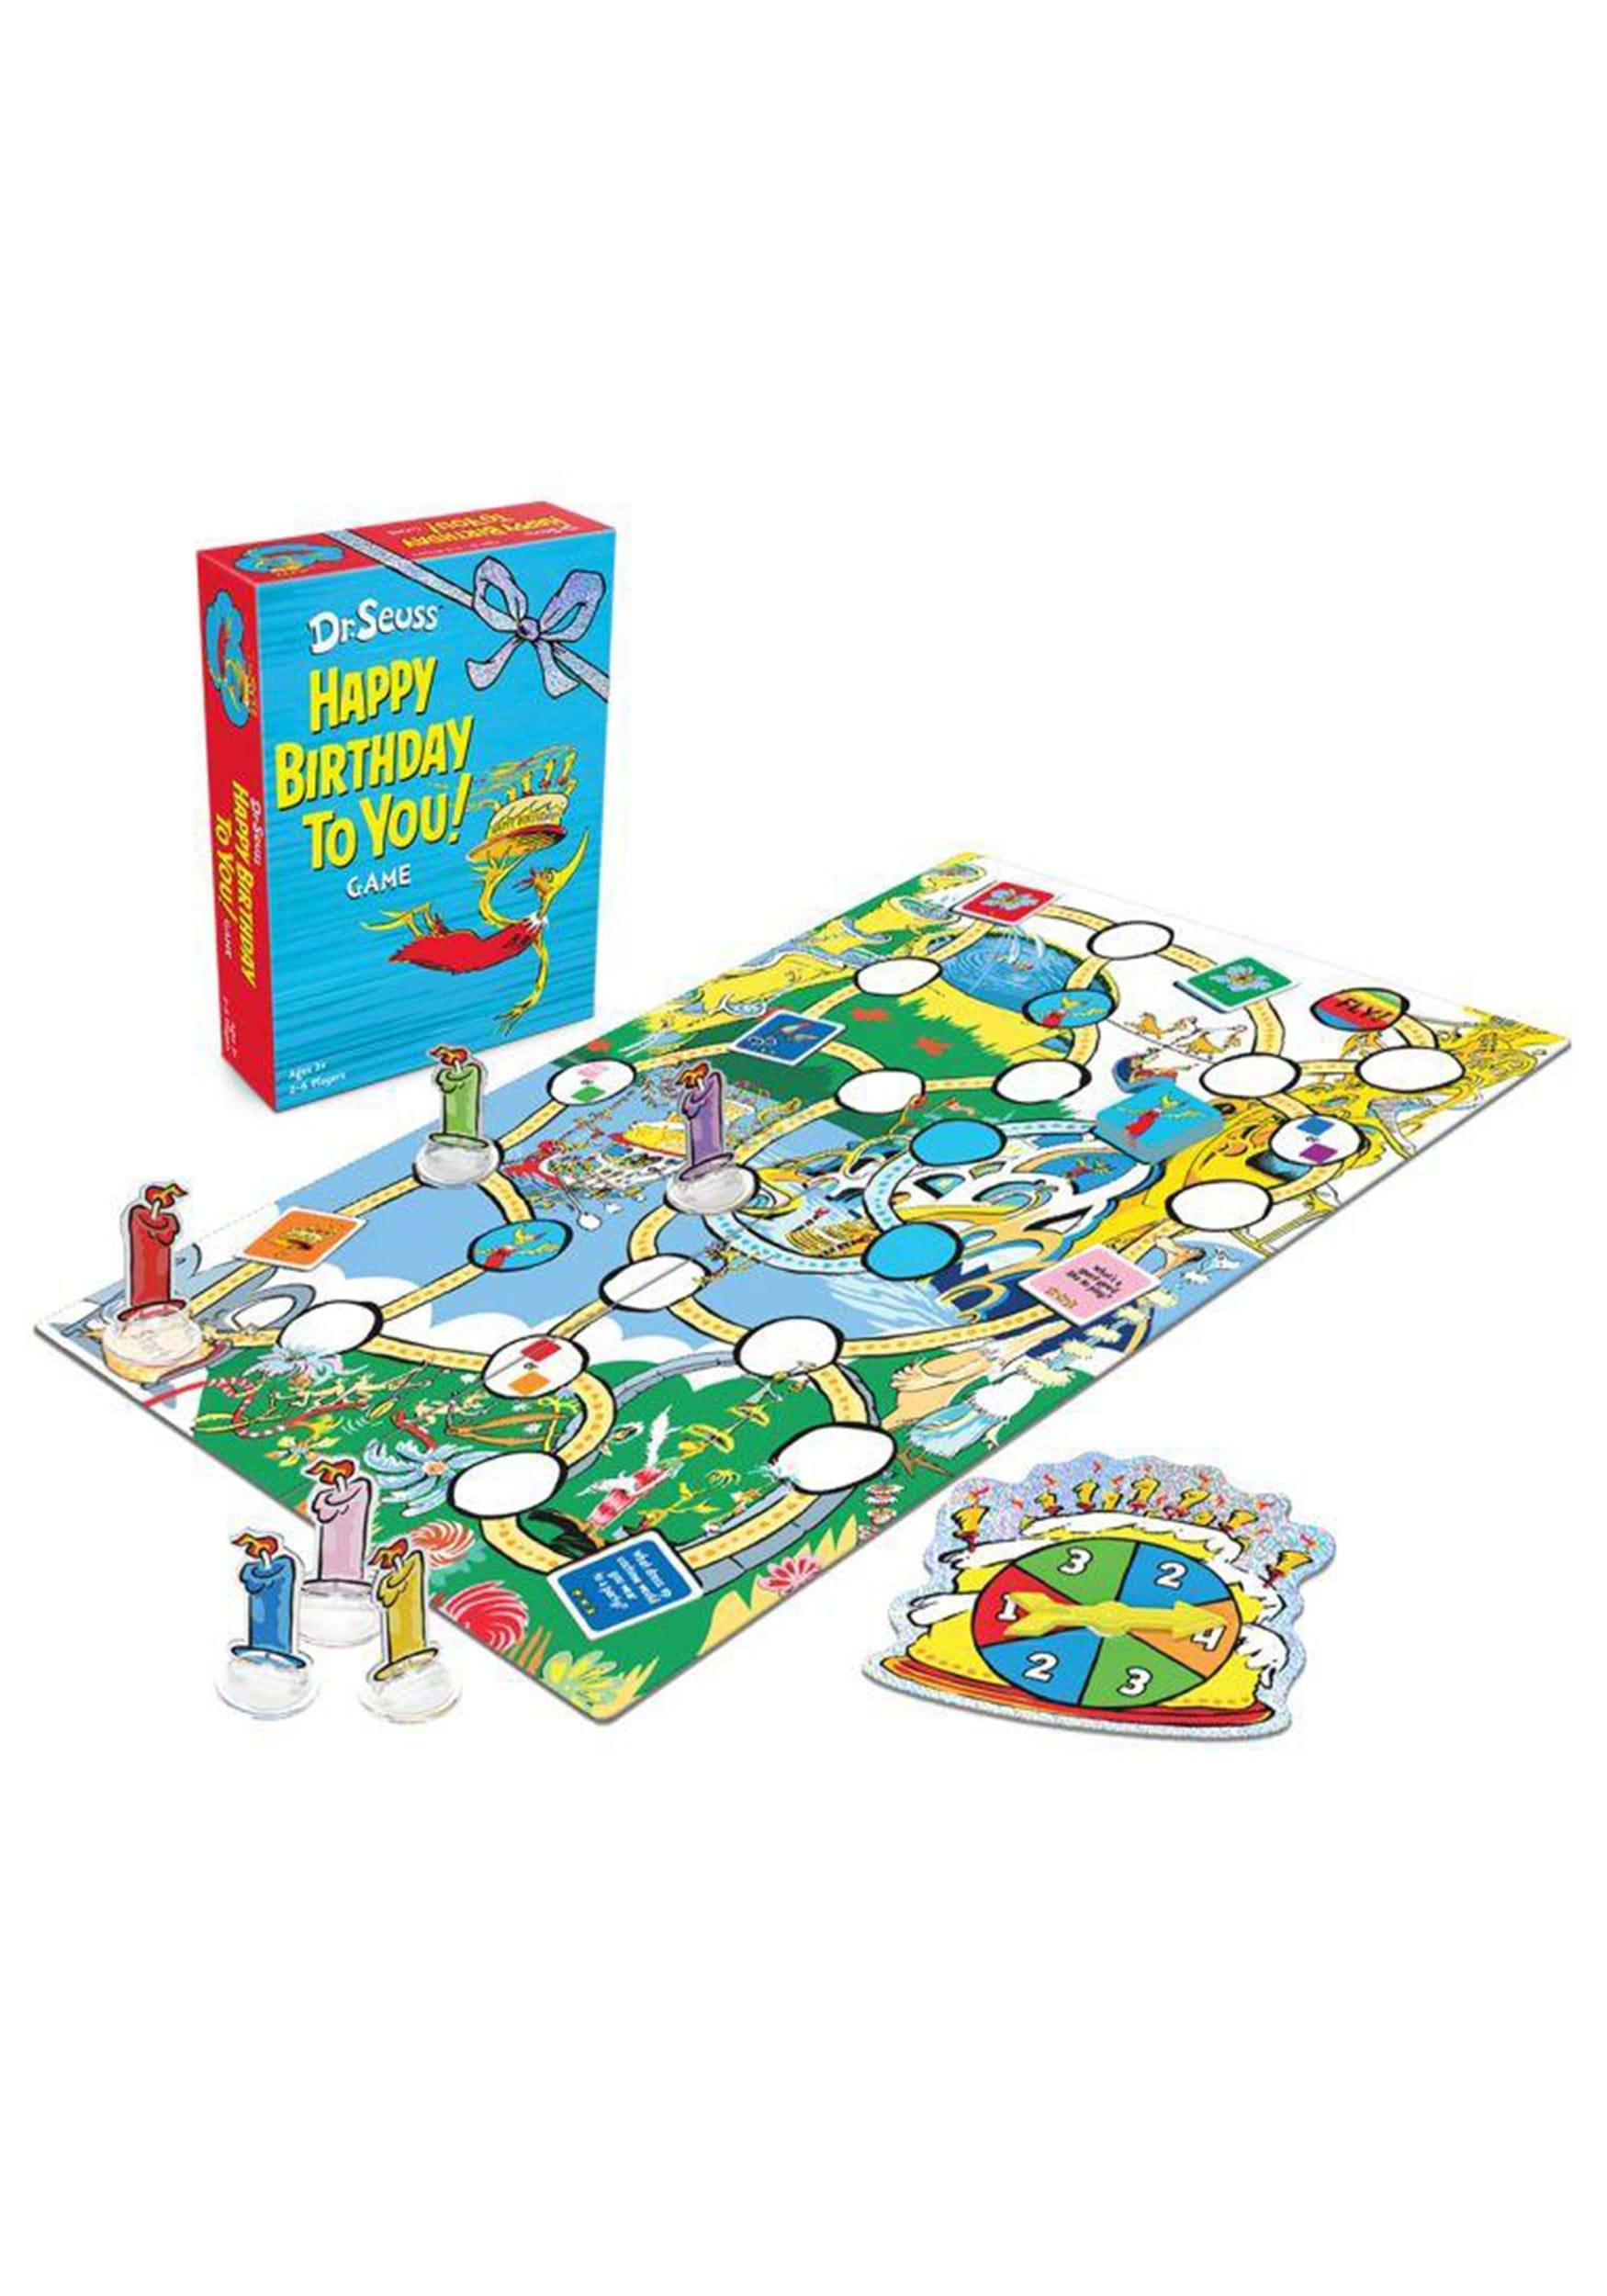 Signature Board Games: Dr. Seuss Happy Birthday To You! Game